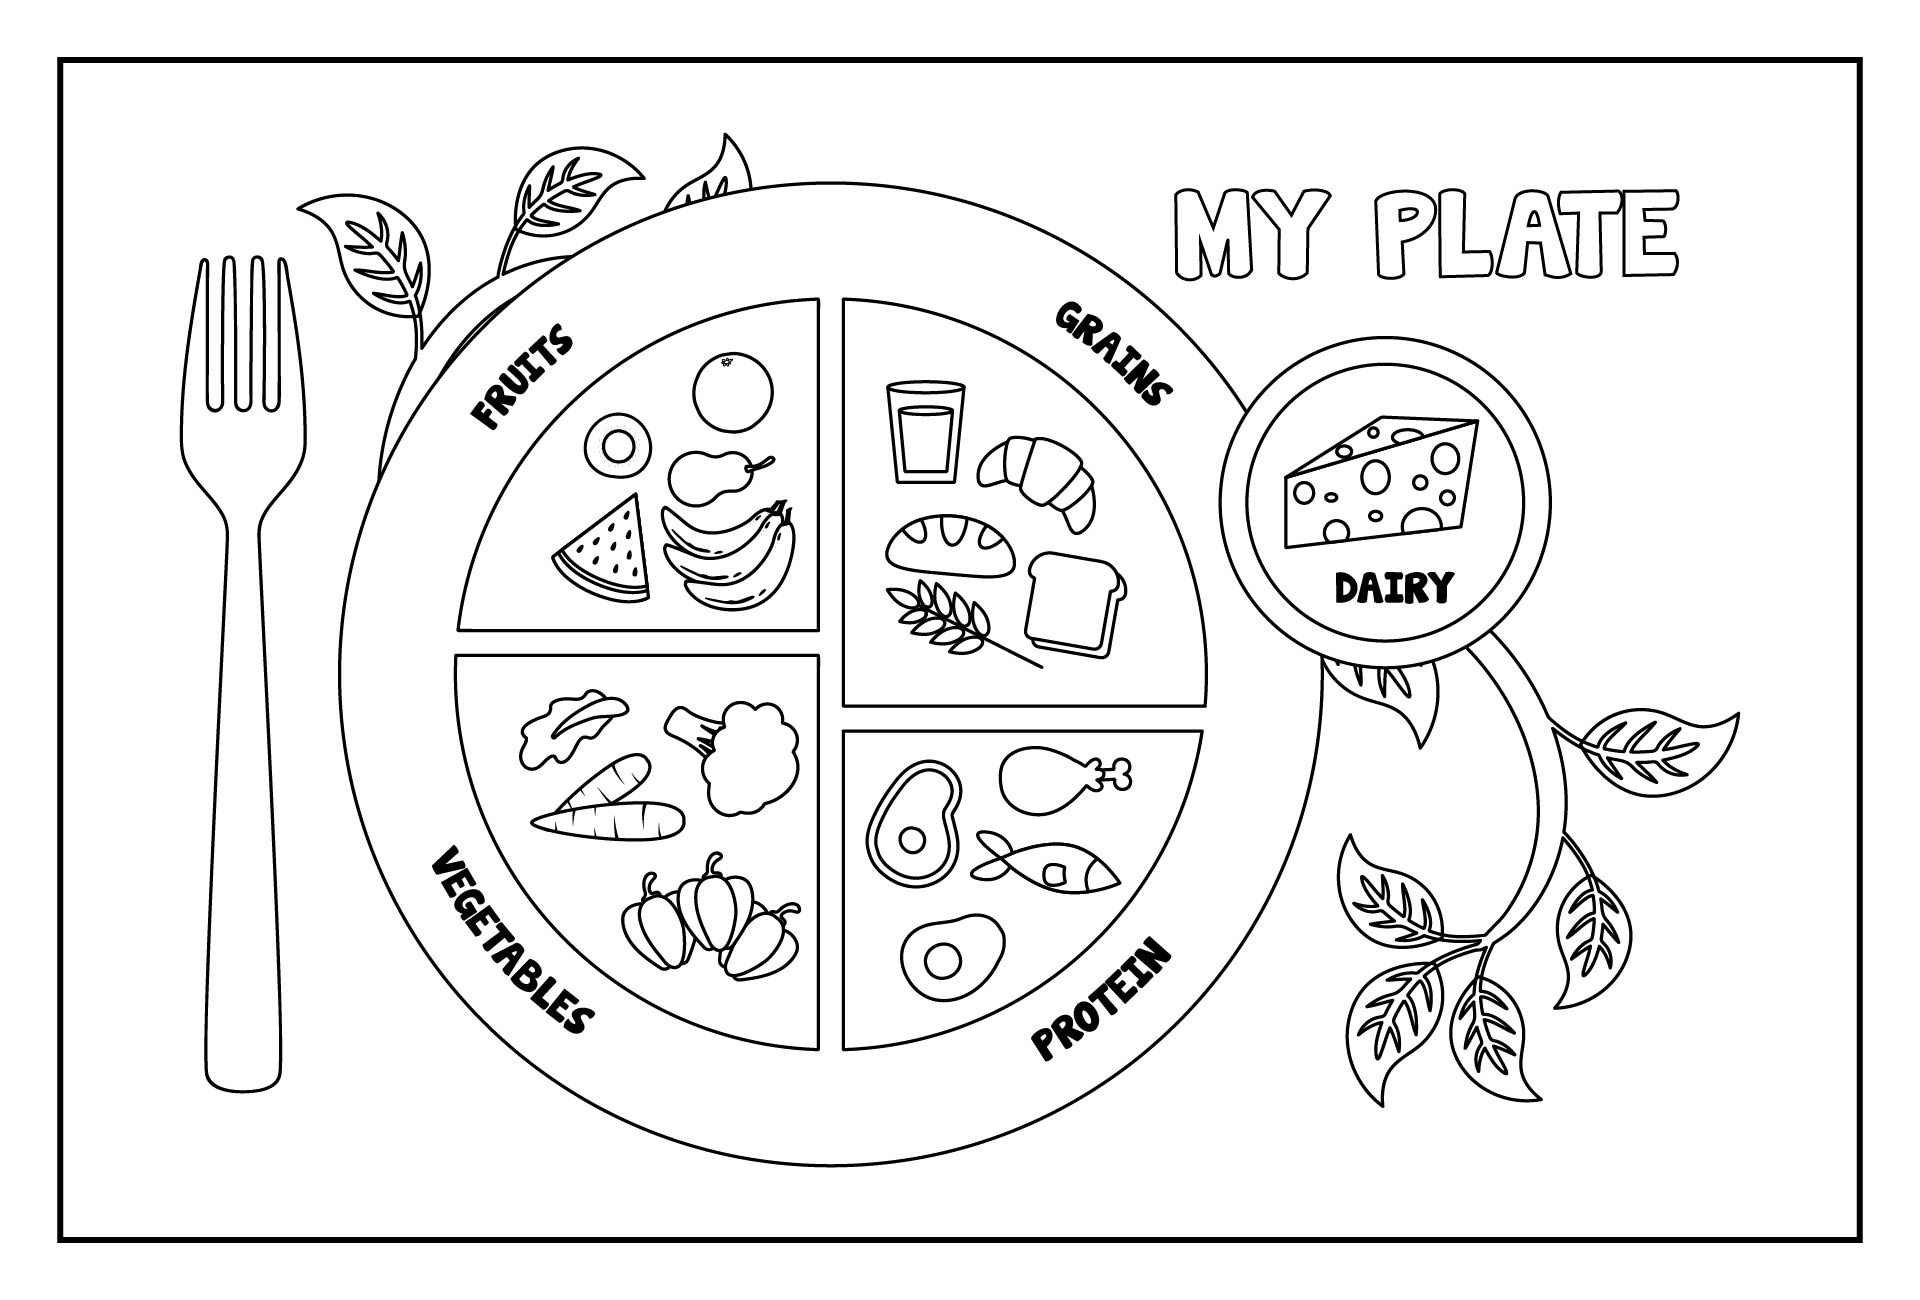 Printable MyPlate Coloring Page